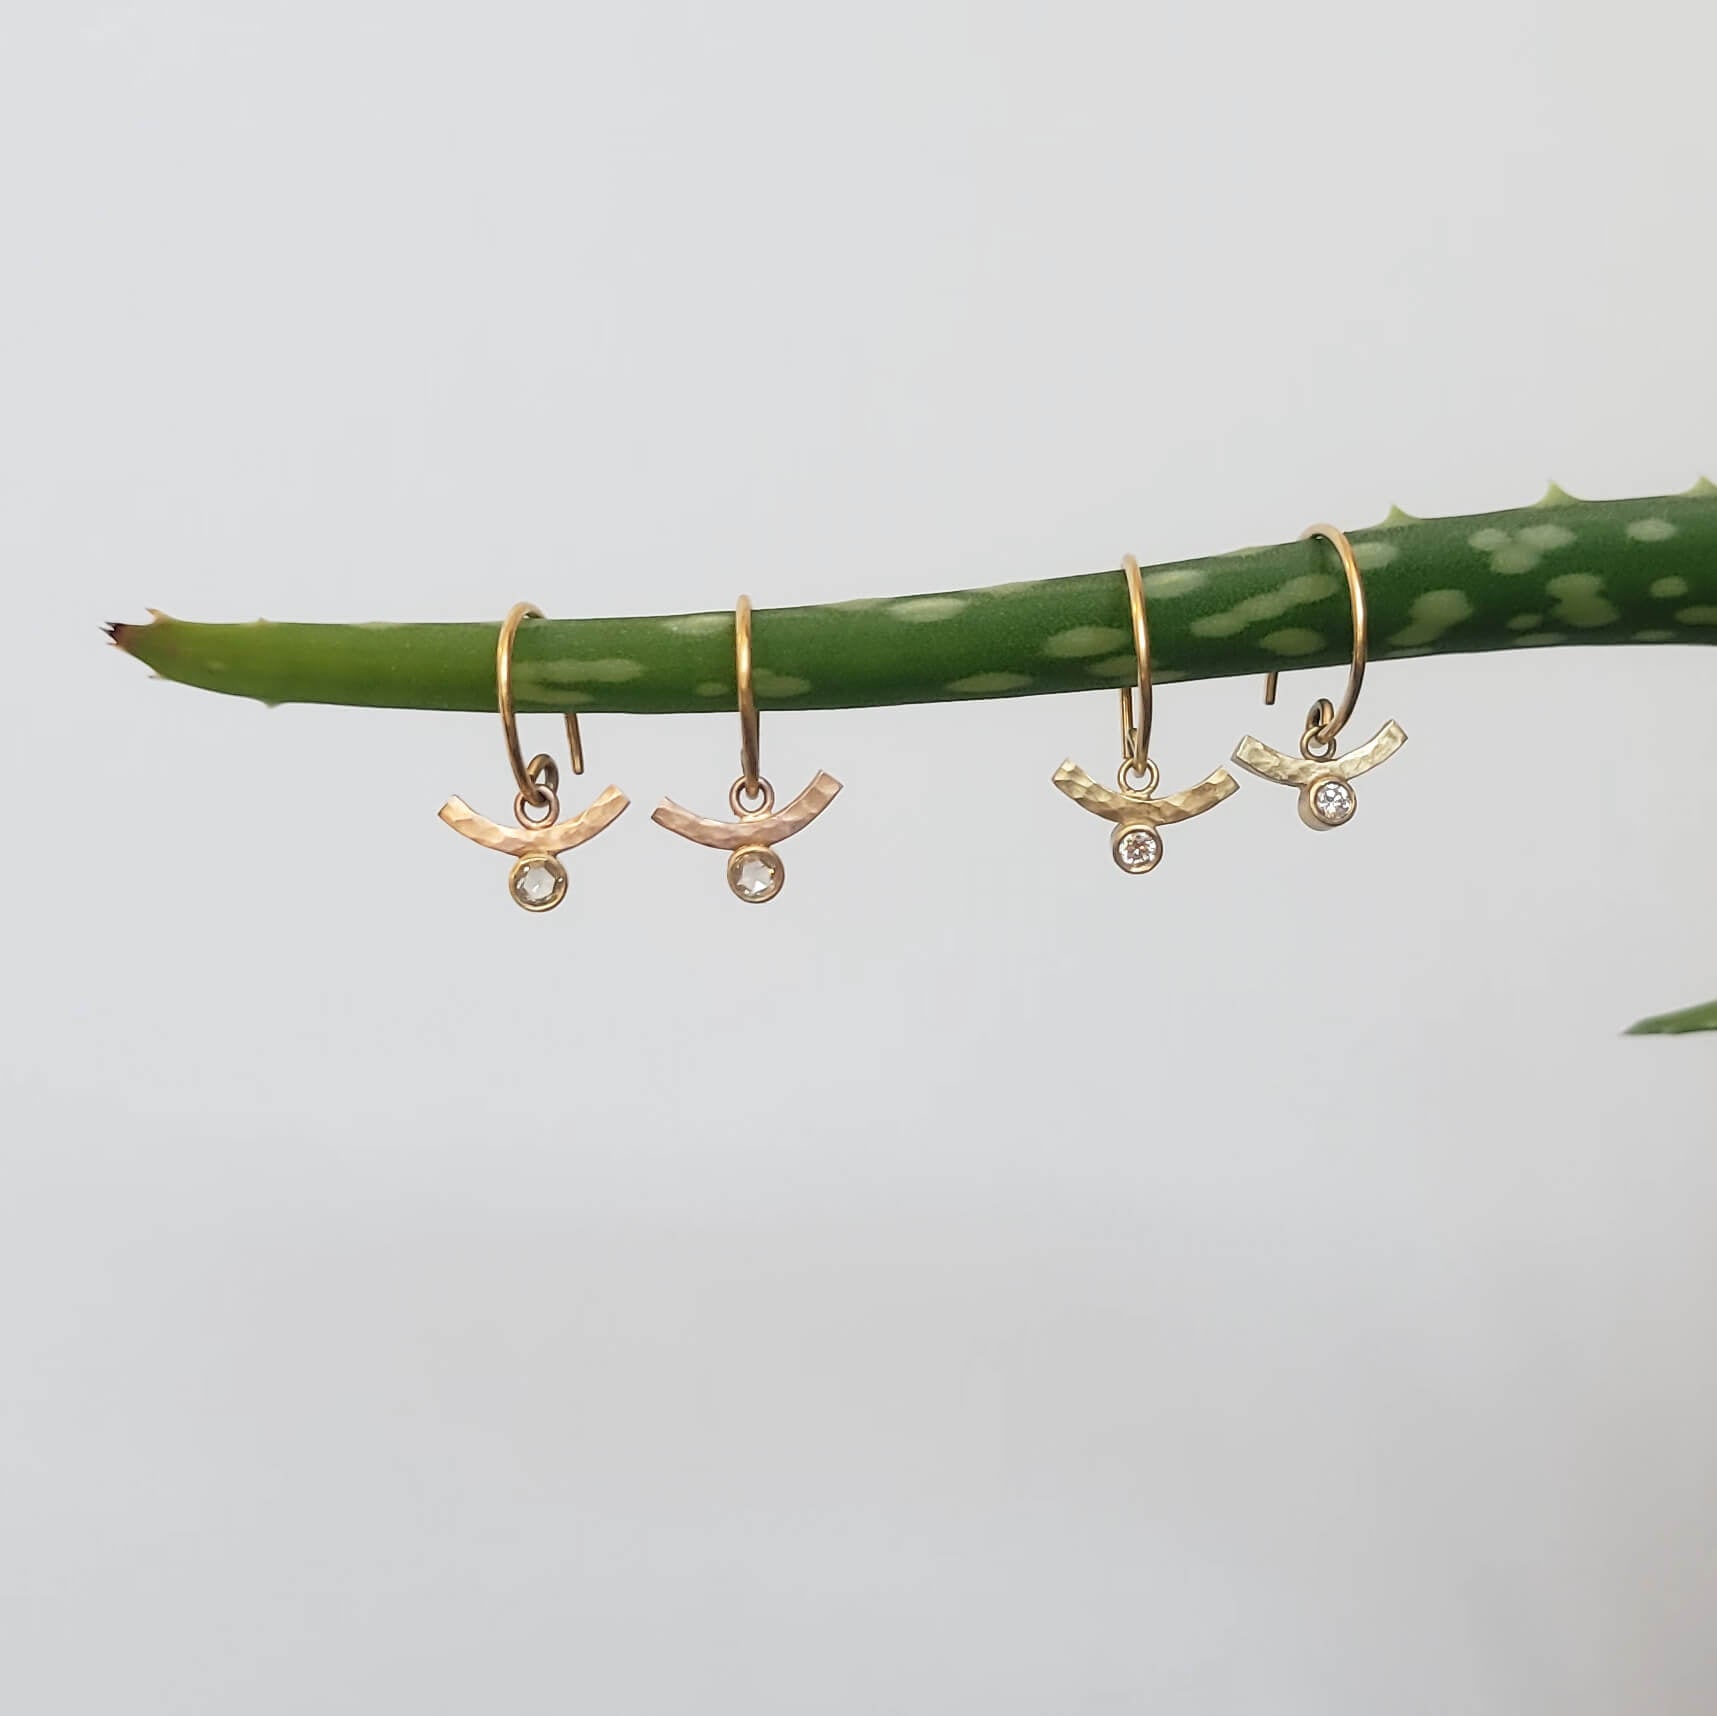 Arc Earrings in Rose Gold with Rosecut Diamond Accents